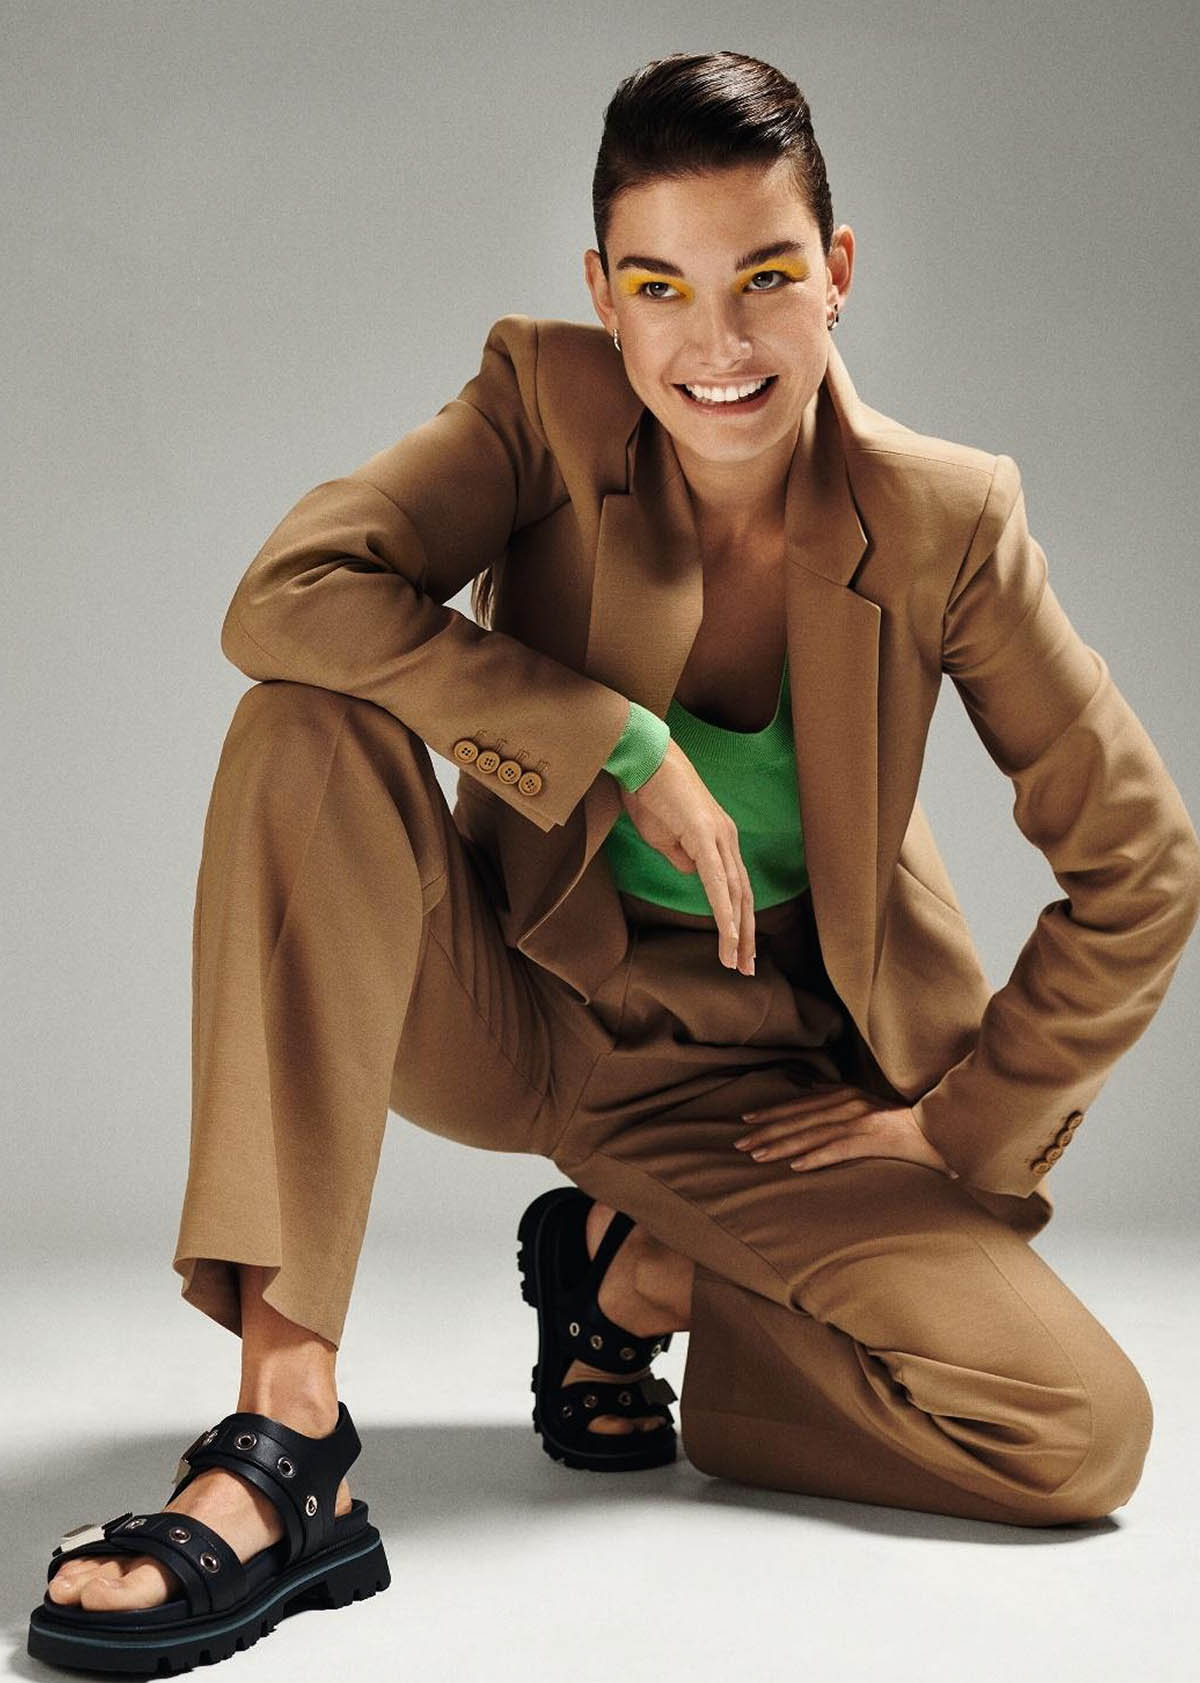 Ophelie Guillermand by Alex Waltl for Elle Germany February 2021